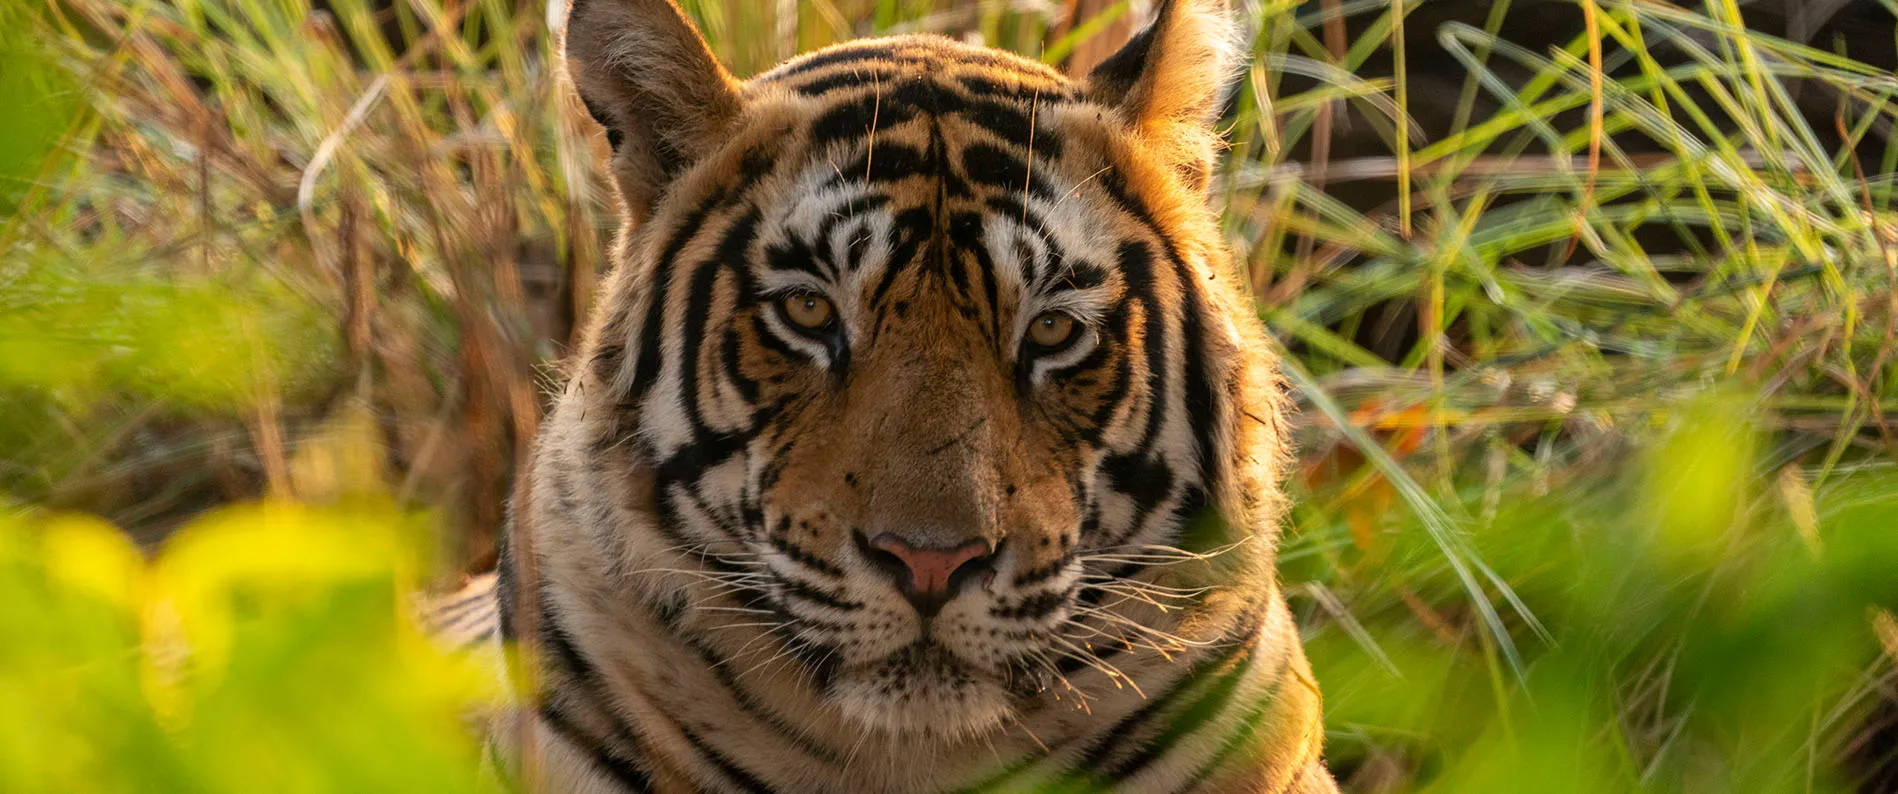 The majestic royal bengal tiger captured during the Ranthambore safari. Get to see such great views with the Eye of the Tiger